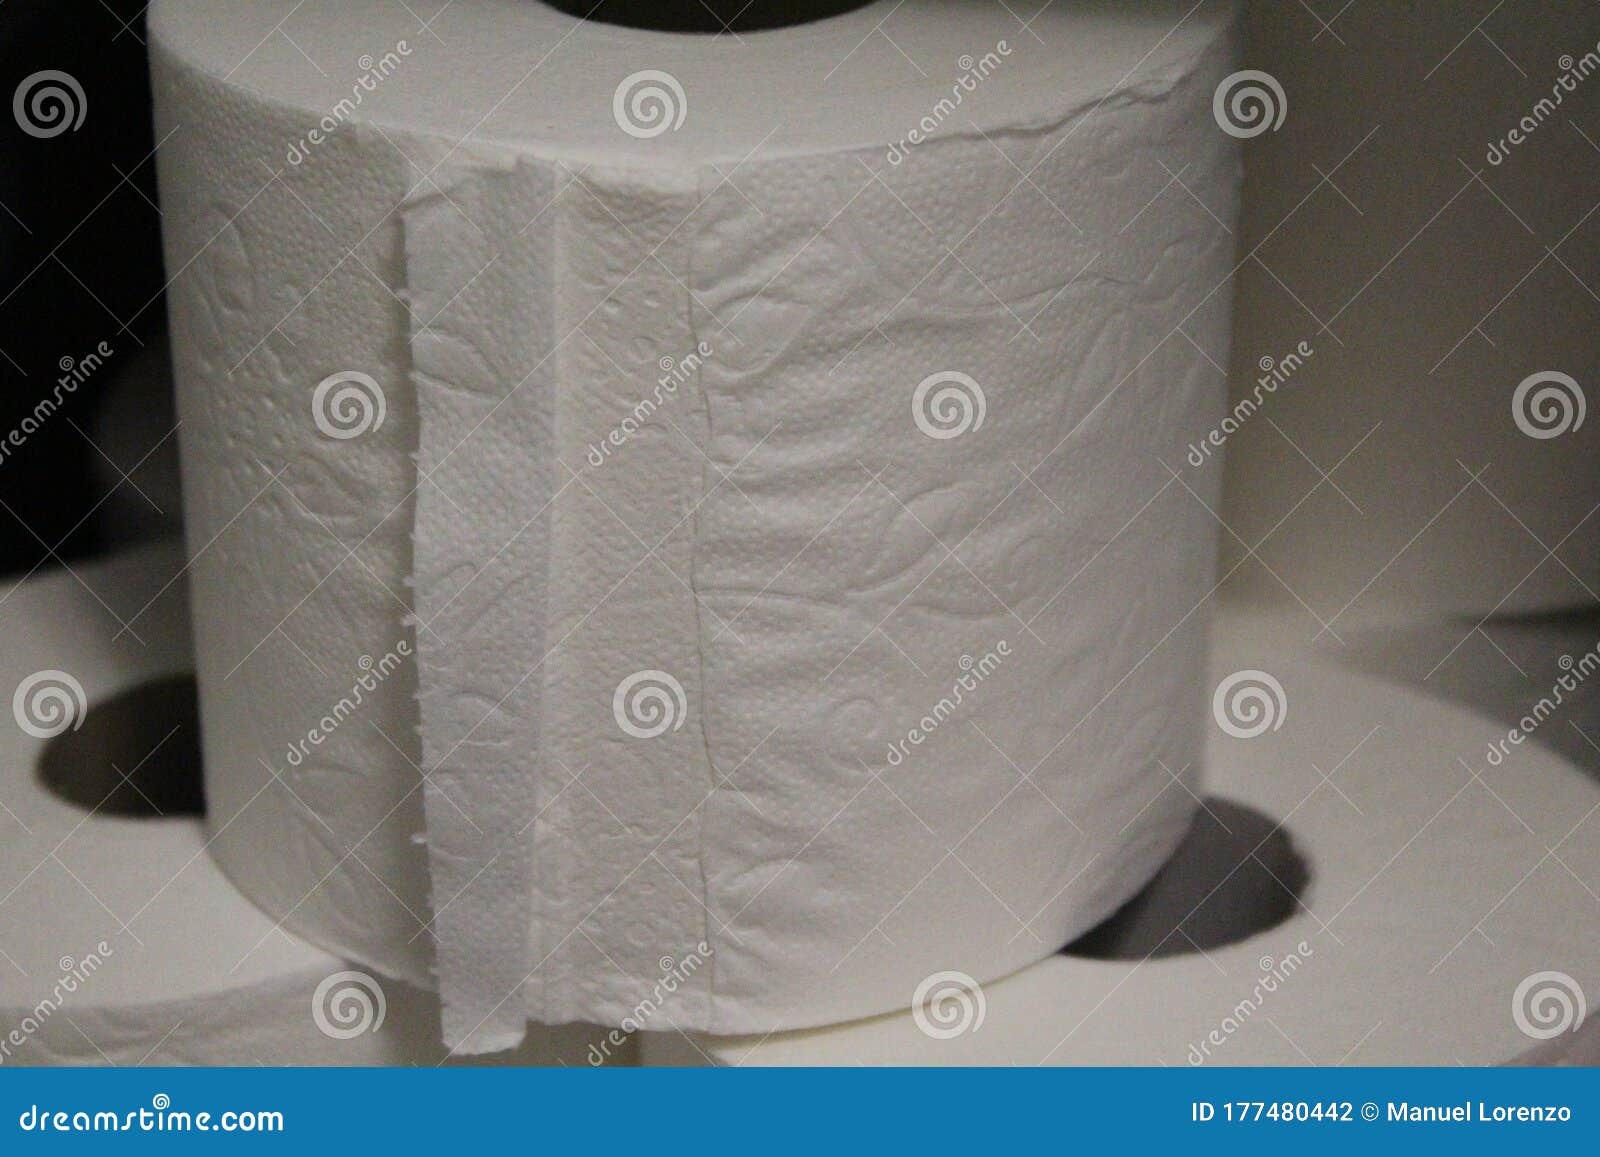 white toilet paper roll ecological cleaning cloth